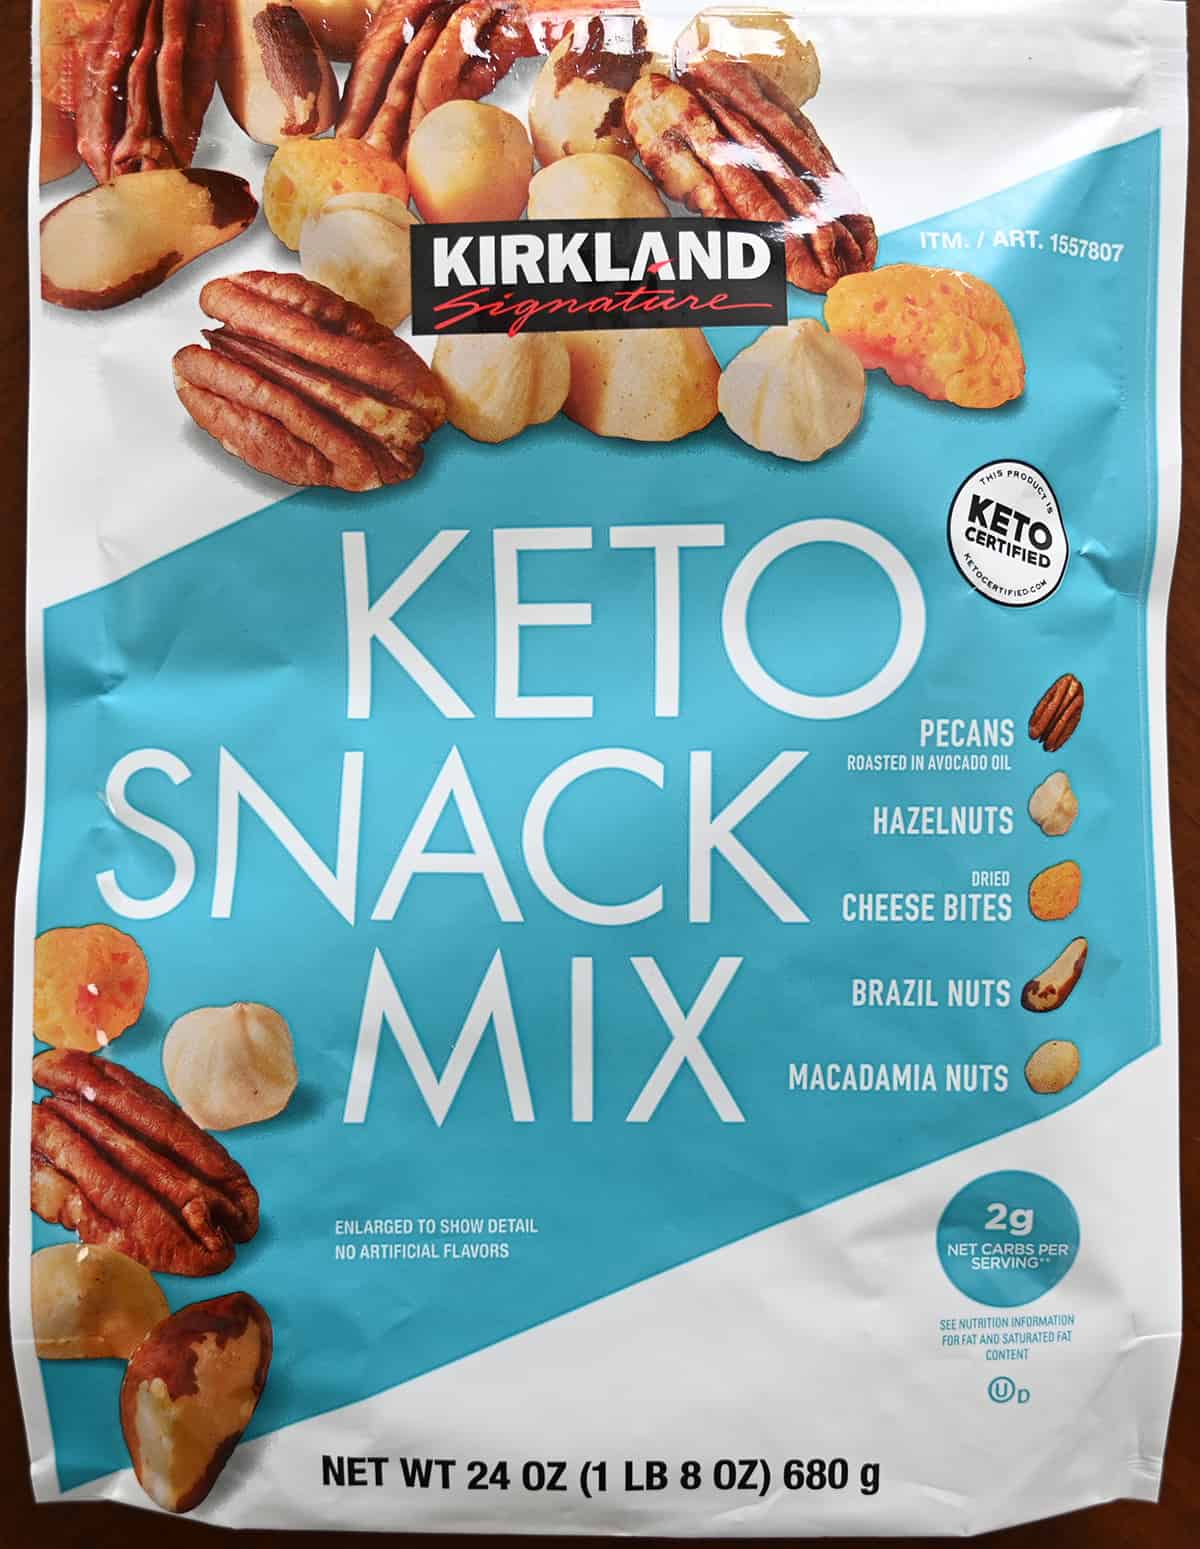 Closeup image of the front of the keto mix bag showing the size of the bag and that it's keto certified. 